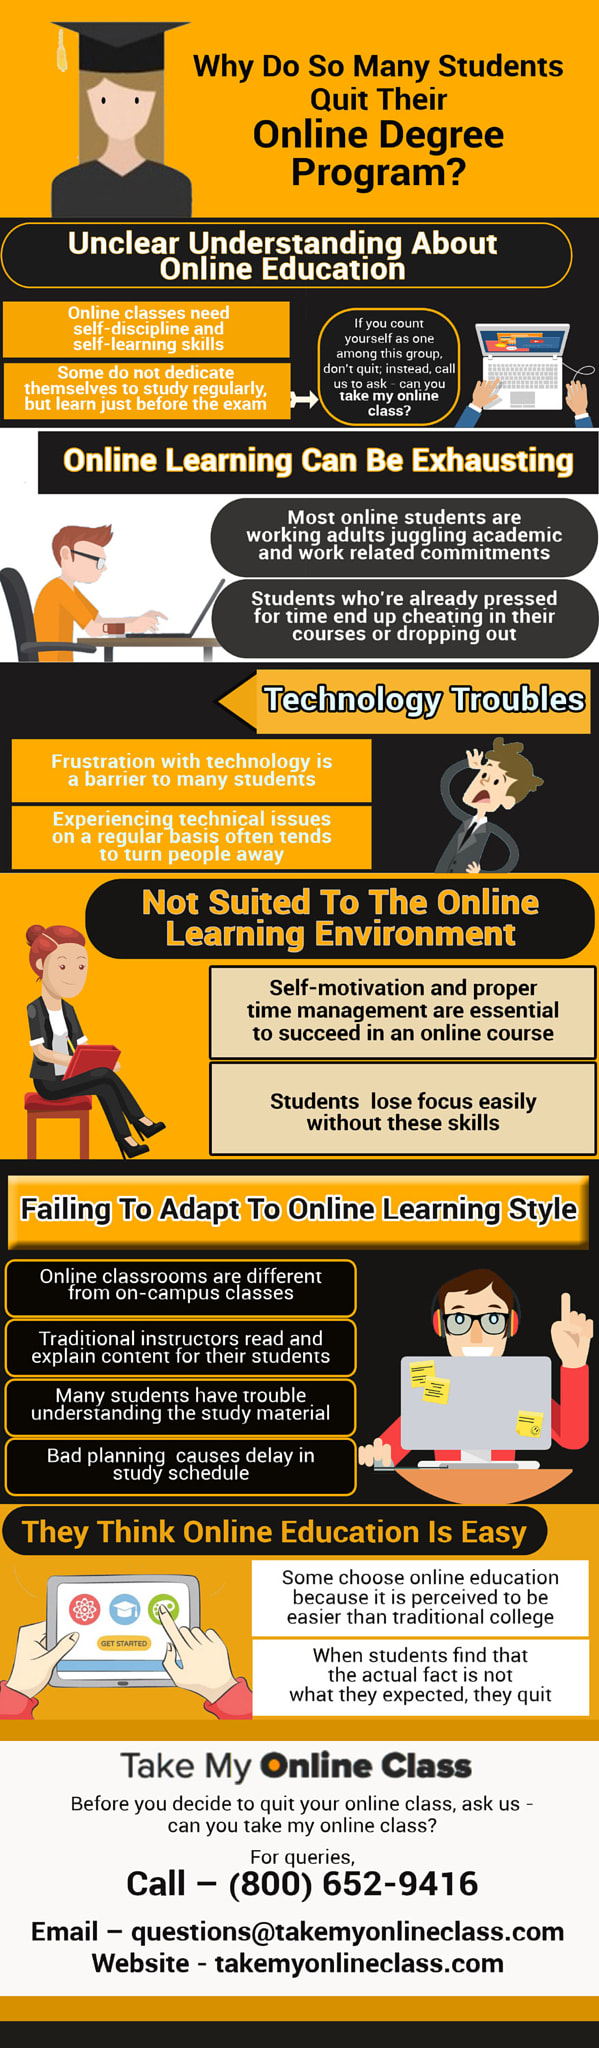 6 Reasons Why Students Quit Their Online Course